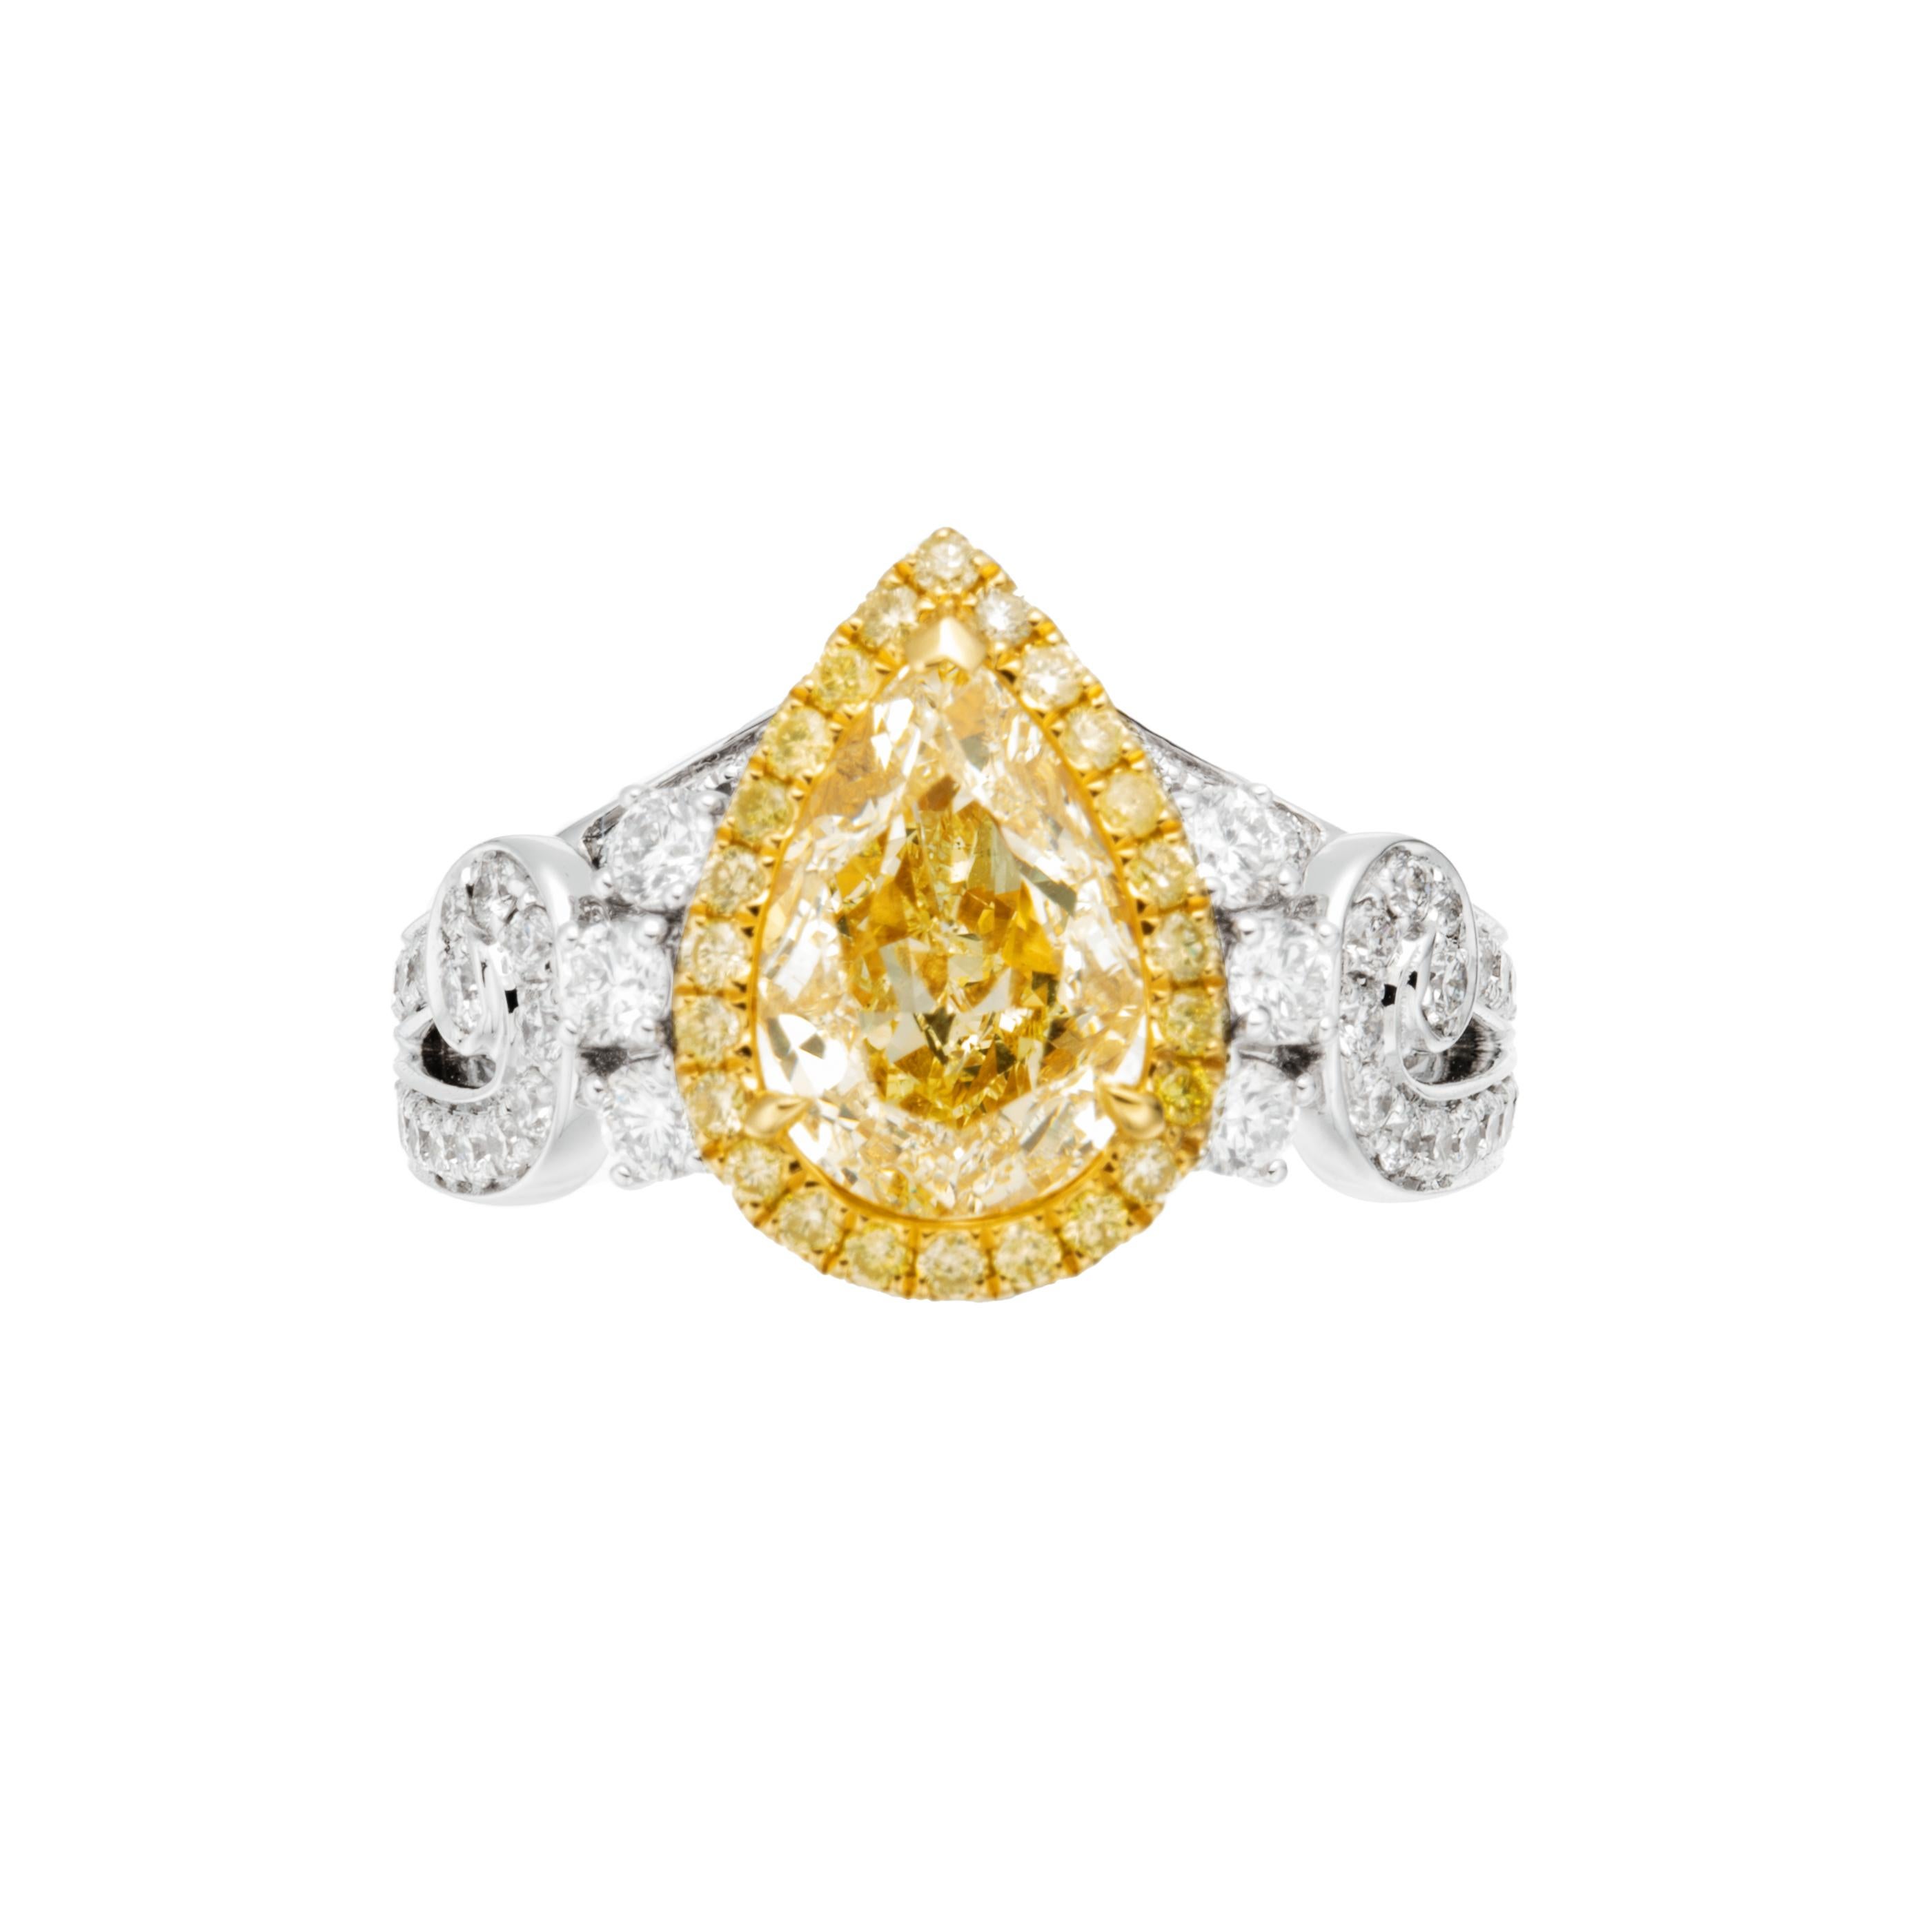 Introducing a truly captivating and classic masterpiece of jewelry, the 1.99ct Pear Shaped W-X Colour Yellow Diamond Solitaire Ring in exquisite 18KT gold. This ring is a radiant blend of timeless elegance and contemporary style, destined to make a